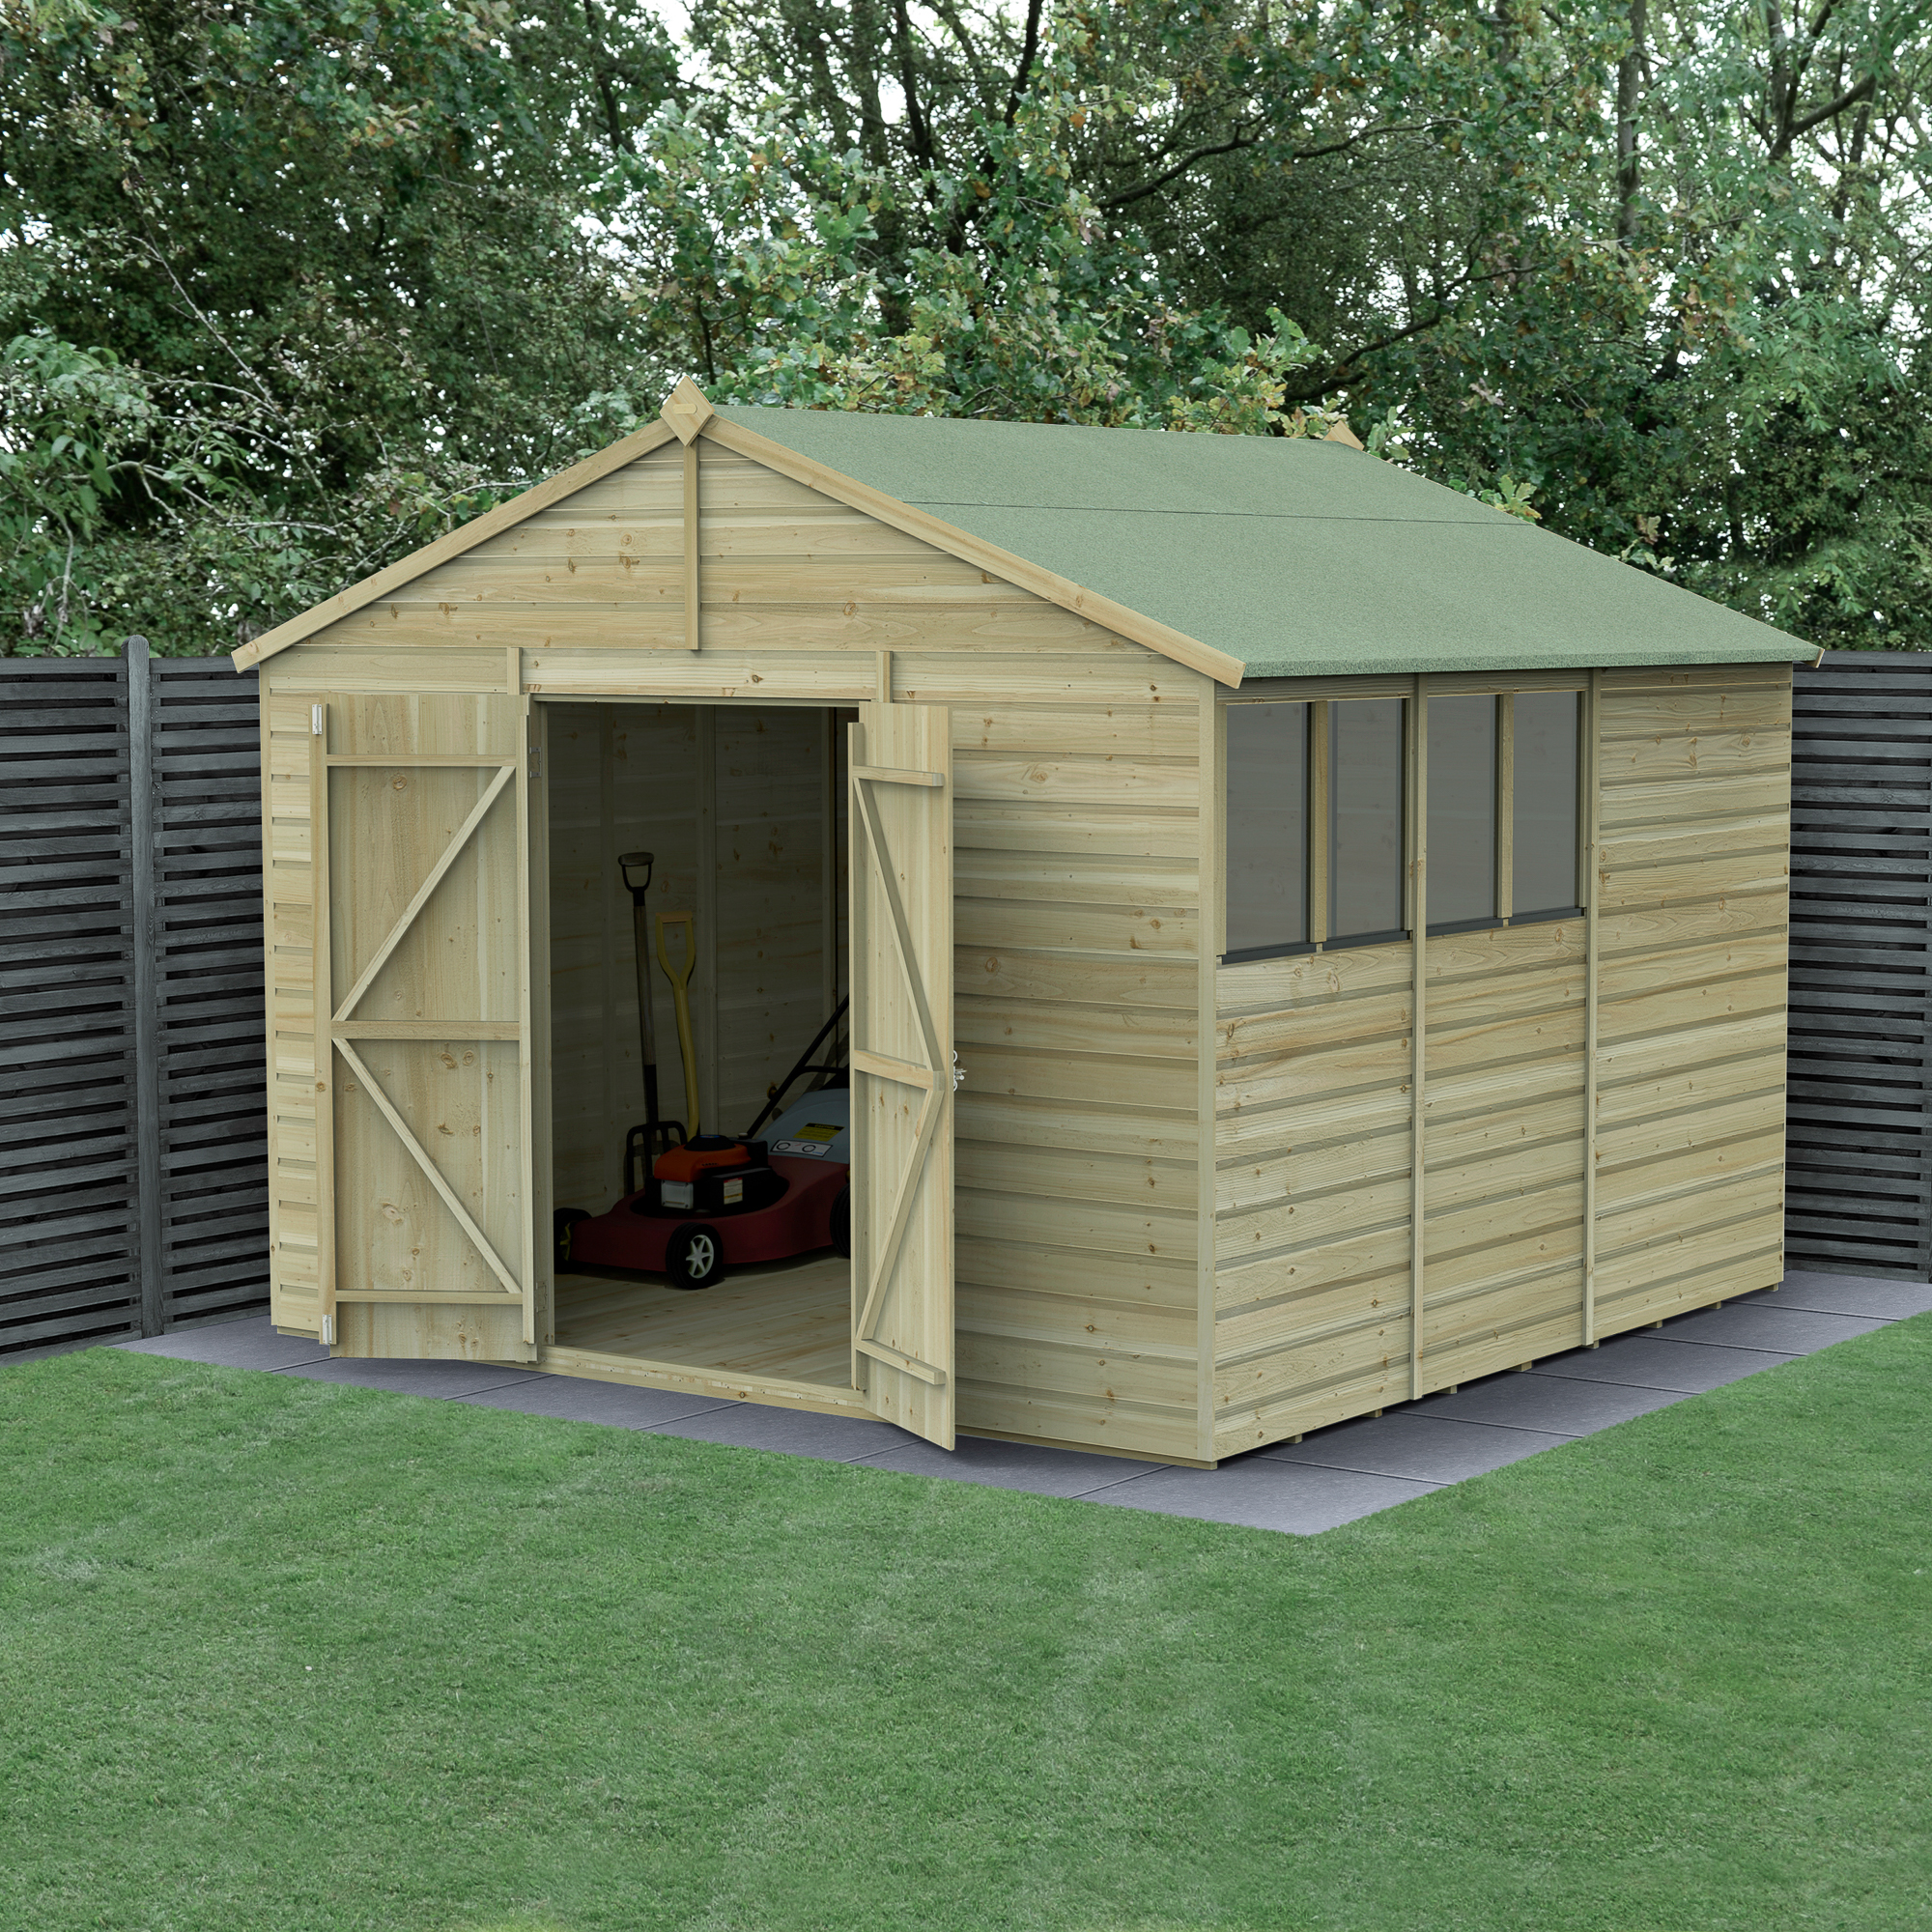 Forest Garden Beckwood 10 x 10ft Apex Shiplap Pressure Treated Double Door Shed